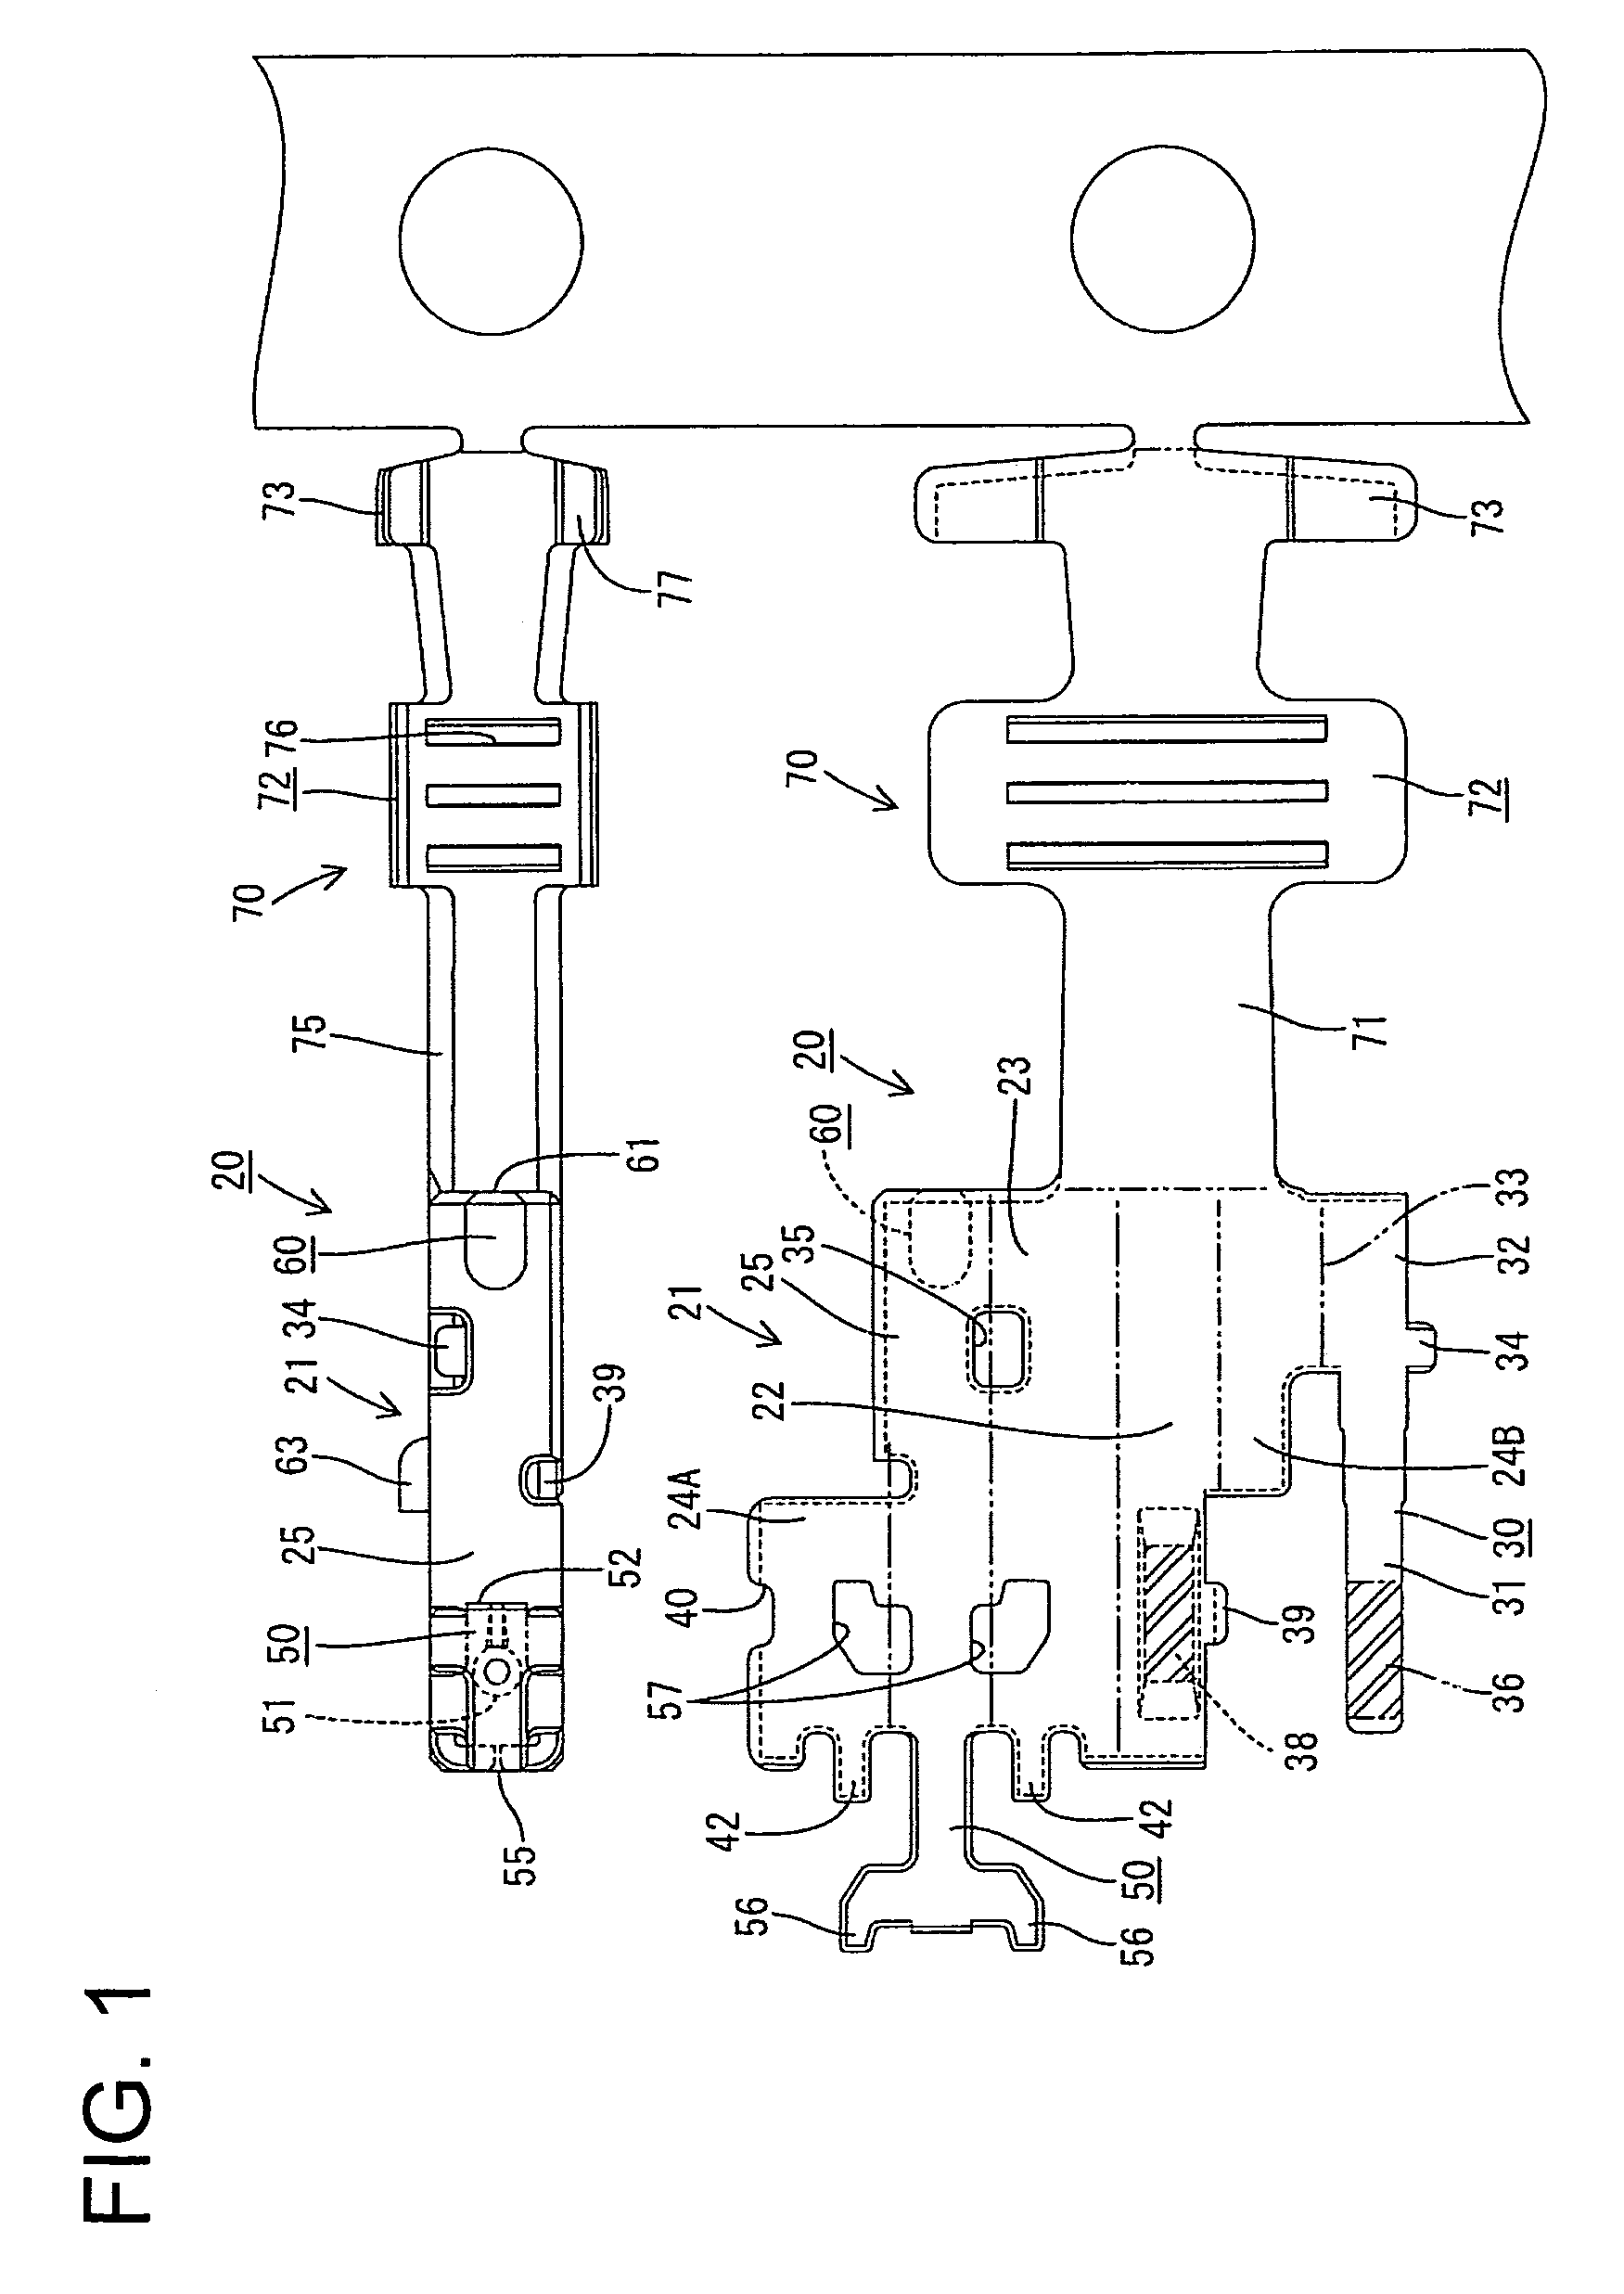 Female terminal fitting and connector provided therewith